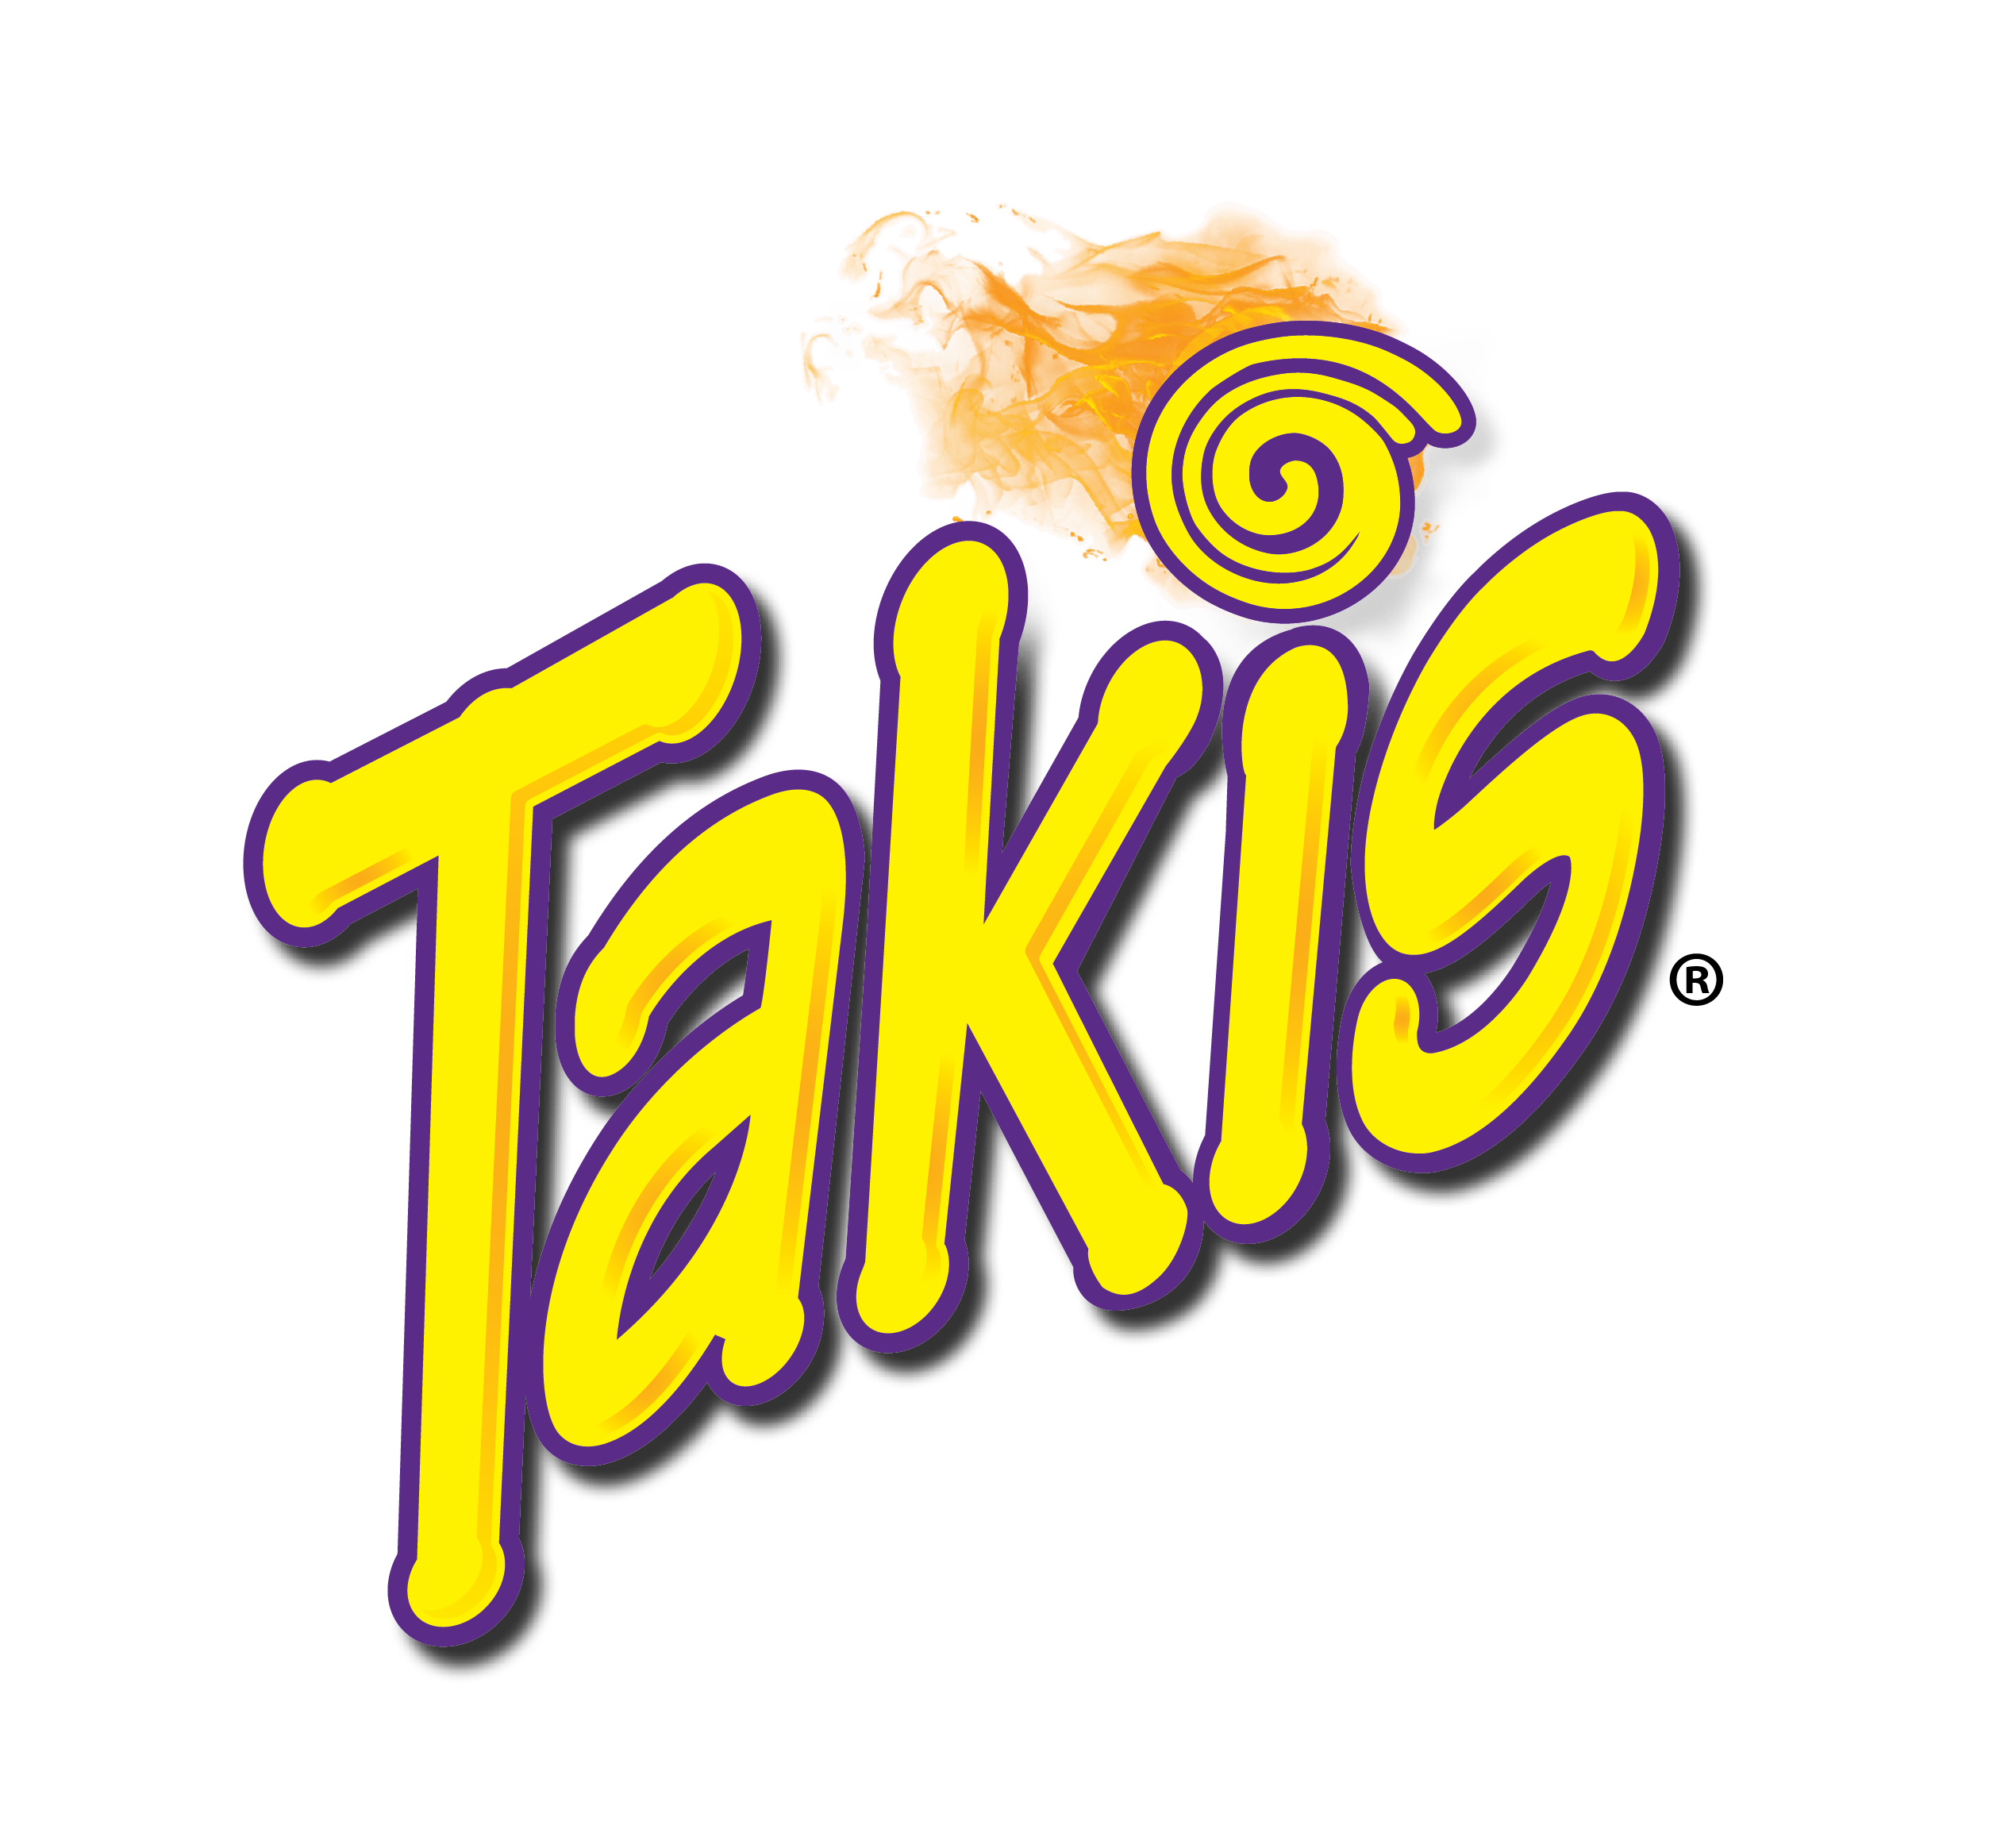 The Official Sponsor of Takis National Signing Day and National Selection Tour for the U.S. Army Bowl